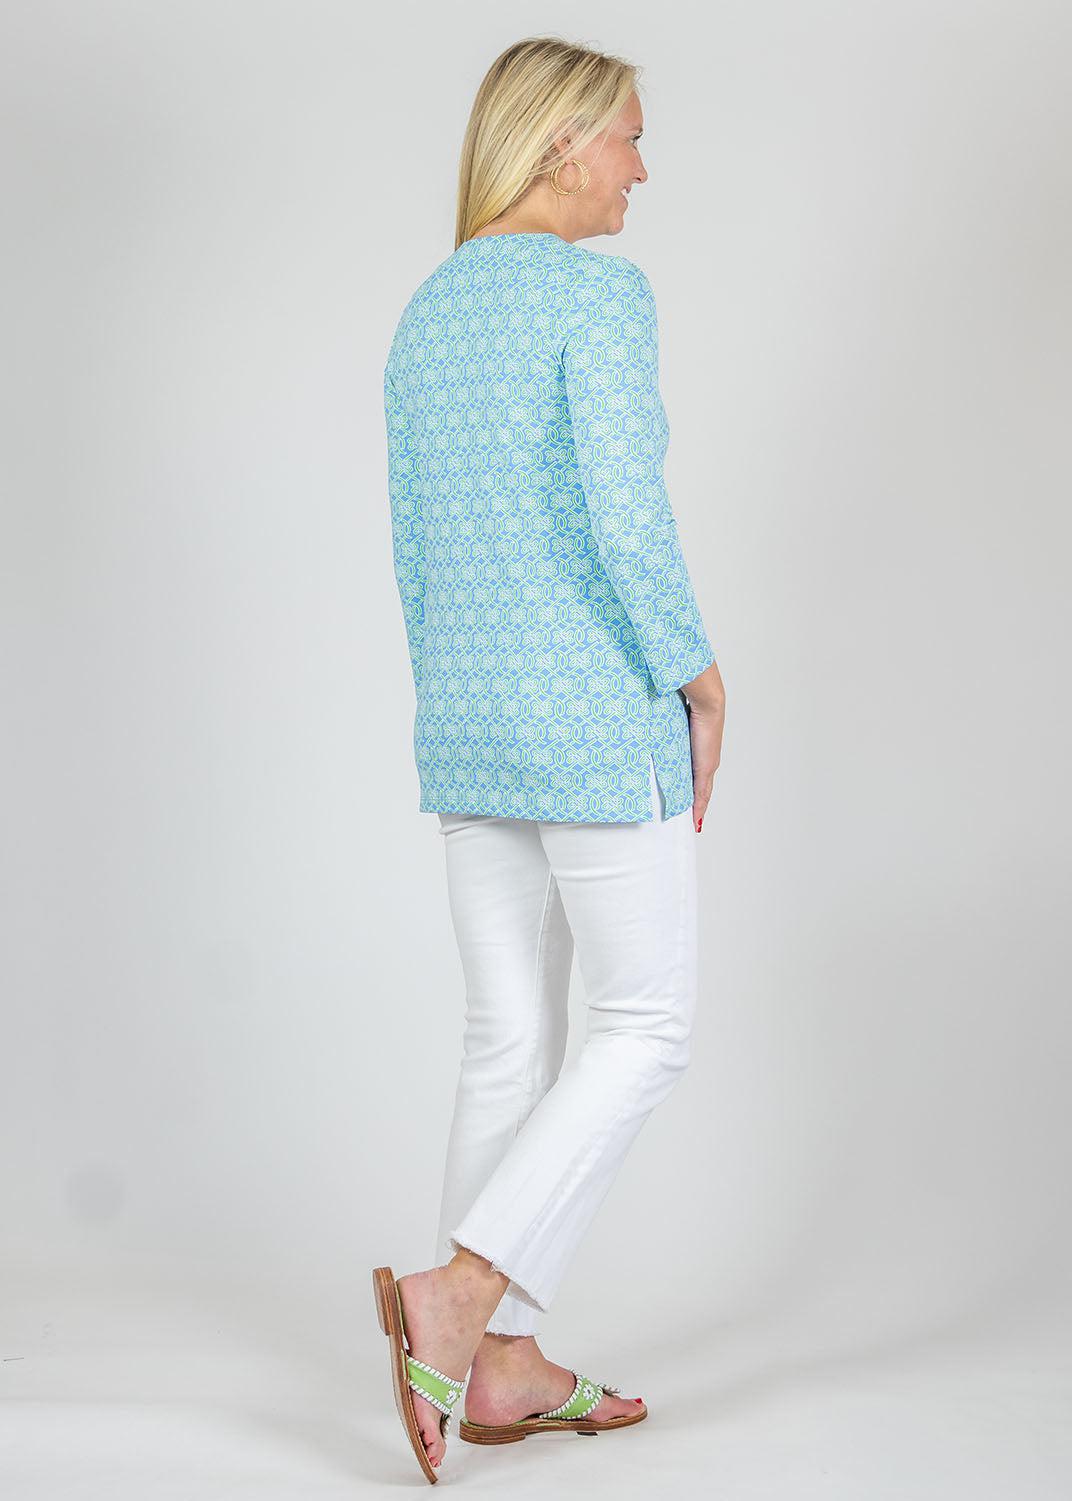 Lucille Blouse - Tie a Knot Blue/Green